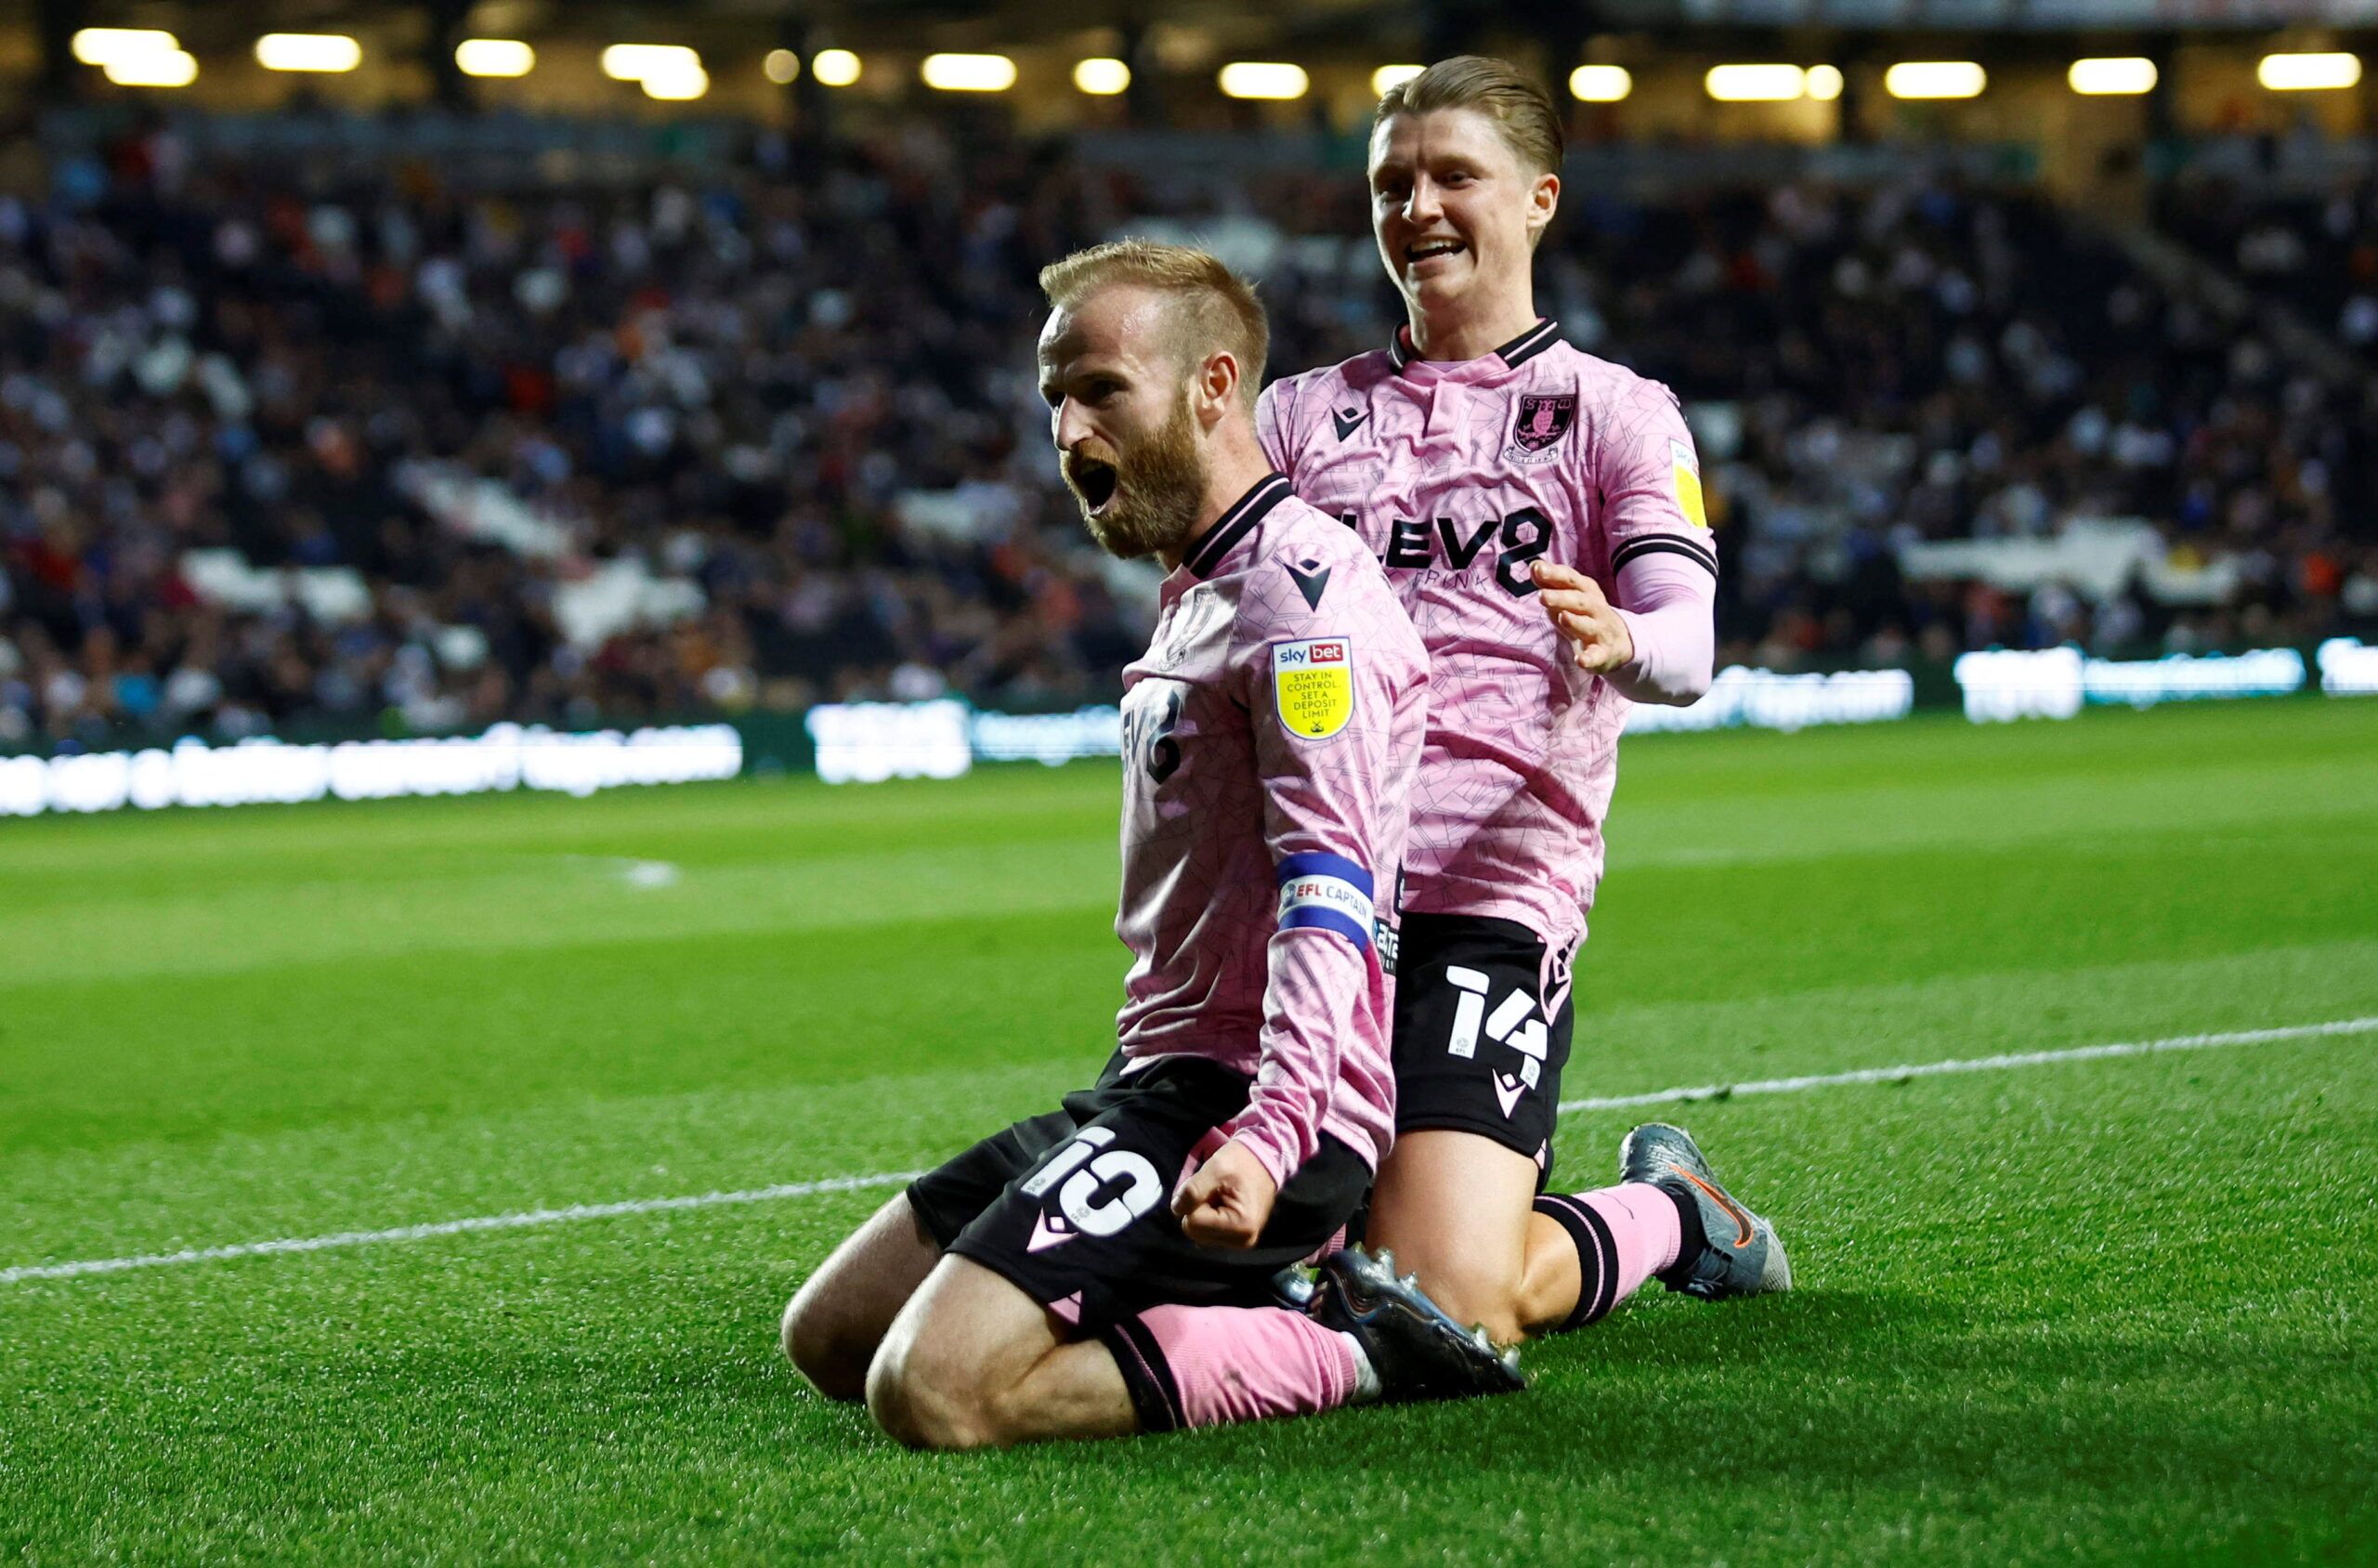 Soccer Football - League One - Milton Keynes Dons v Sheffield Wednesday - Stadium MK, Milton Keynes, Britain - April 16, 2022 Sheffield Wednesday's Barry Bannan celebrates scoring their third goal  Action Images/Andrew Boyers  EDITORIAL USE ONLY. No use with unauthorized audio, video, data, fixture lists, club/league logos or 